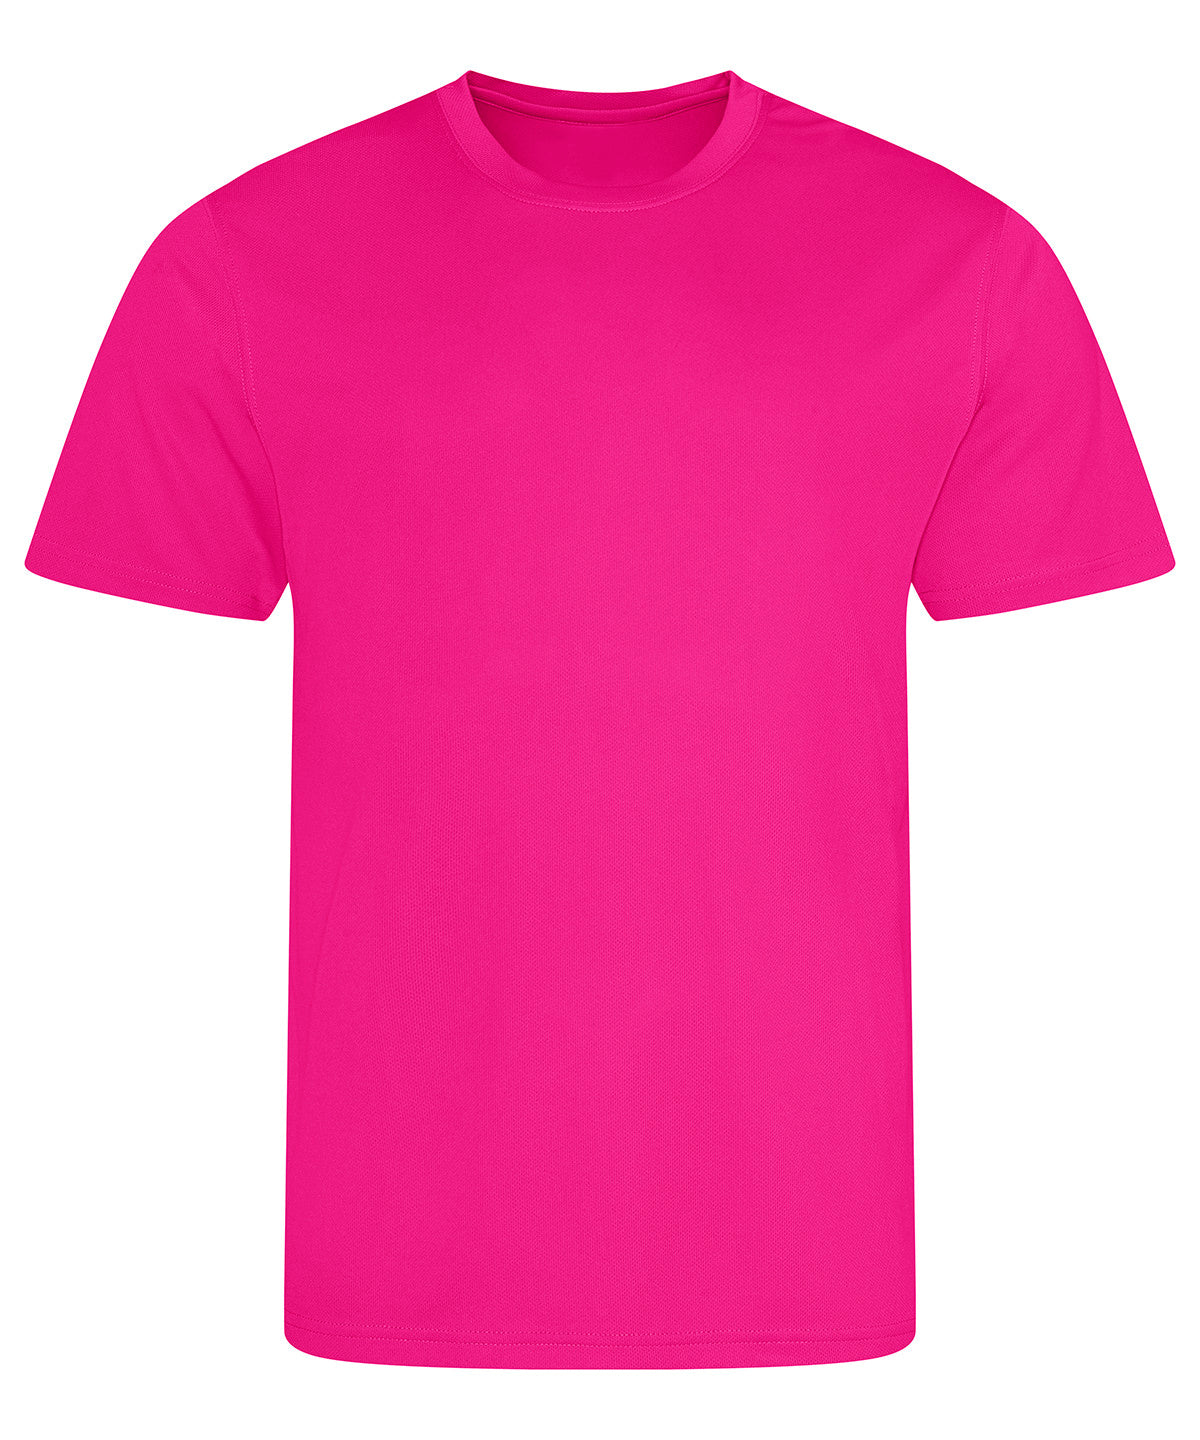 Personalised T-Shirts - Light Pink AWDis Just Cool Cool T